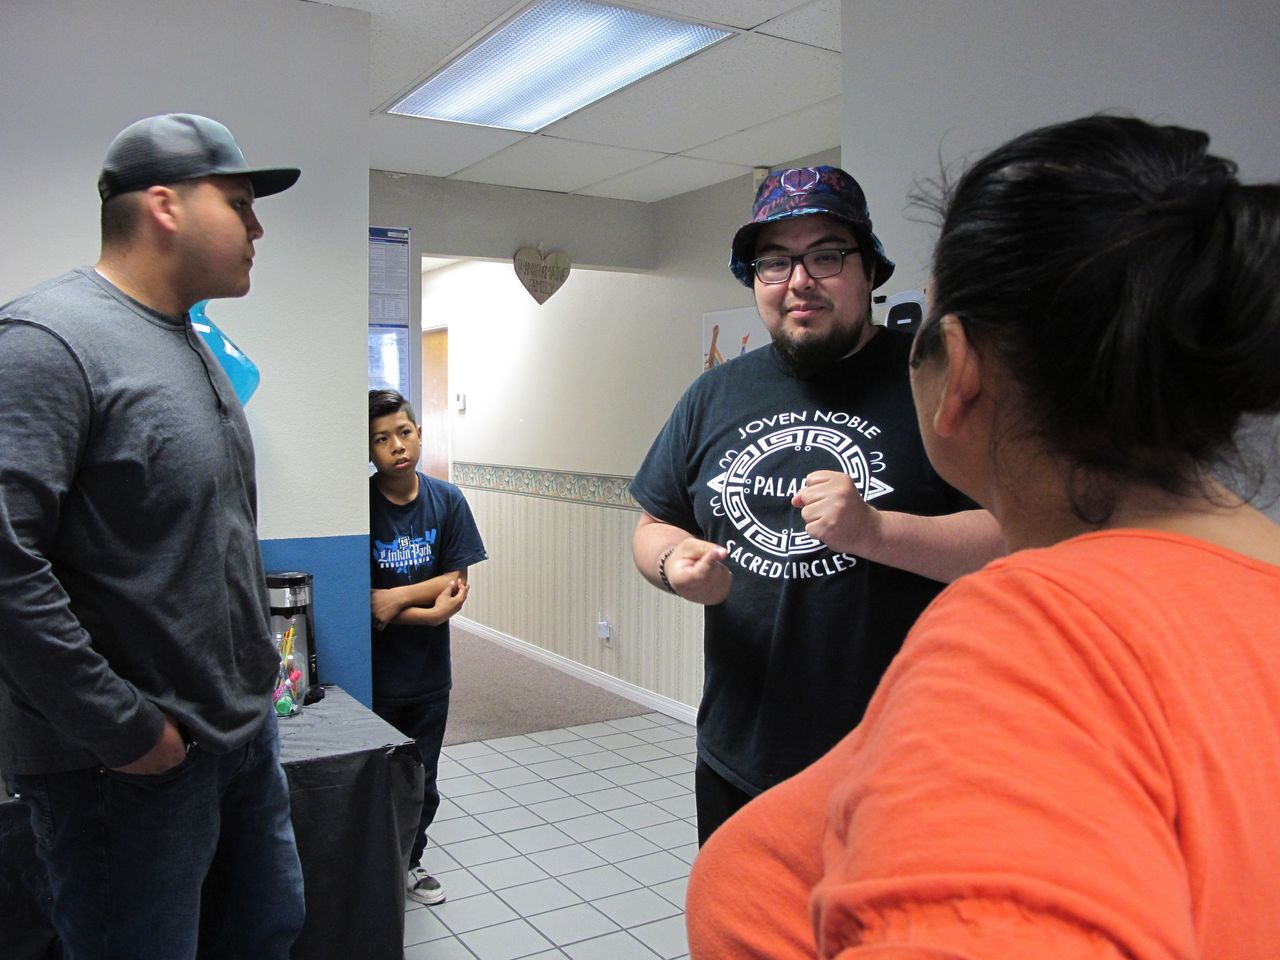 Ramon Campos (center right), a youth organizer with Resilience Orange County, talks to Cesar's mother after she drops off her son for a mentoring session in April 2018.